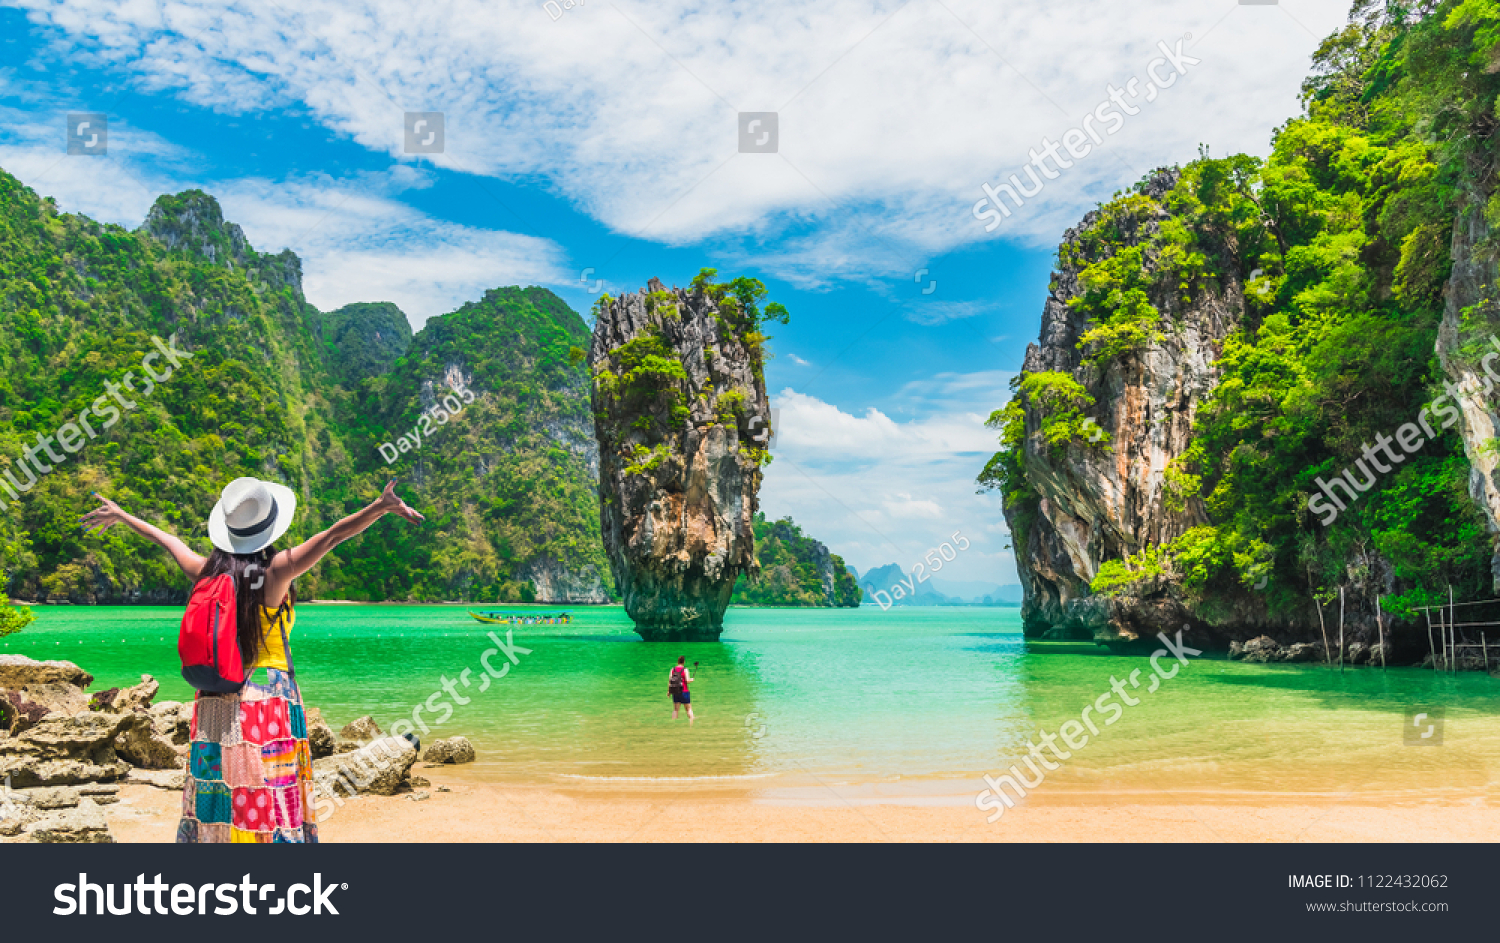 Panorama scenery amazing nature landscape with traveler woman look and joy view James Bond island, Water travel Phuket Thailand, Tourism beautiful destination place Asia, Summer holiday vacation trip #1122432062